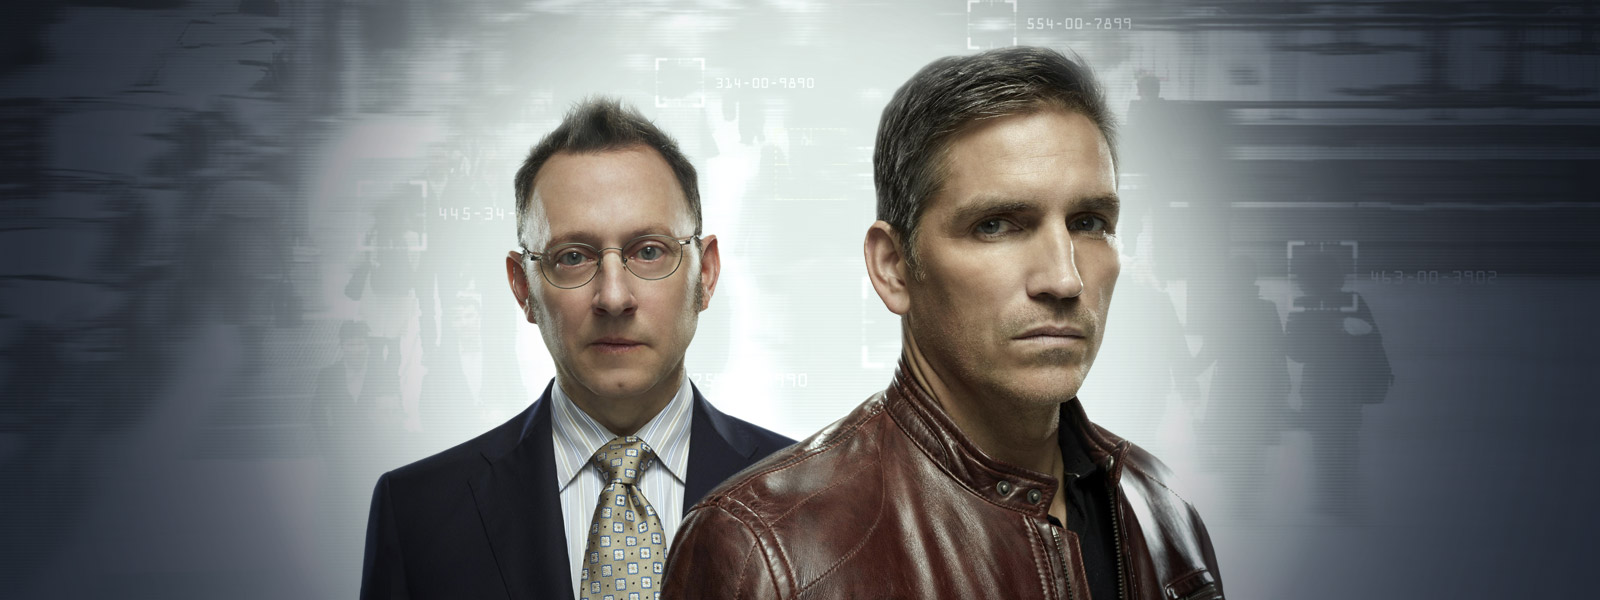 Review: Person of Interest – “The Perfect Mark”